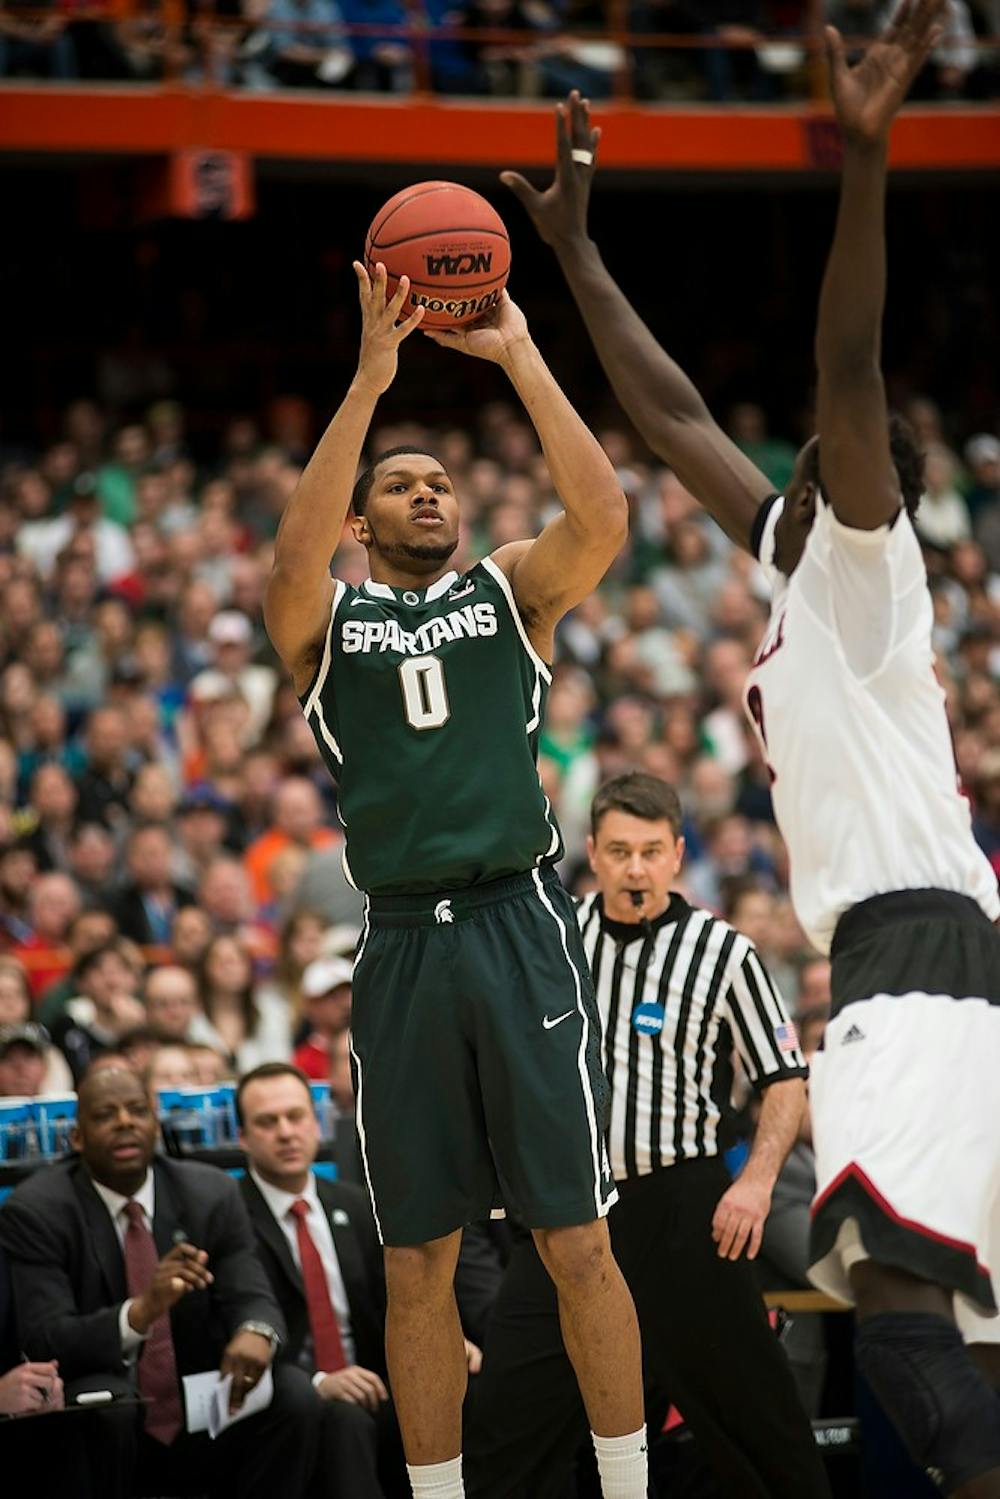 <p>Freshman forward Marvin Clark Jr. attempts a point over Louisville forward/center Mangok Mathiang March 29, 2015, during the East Regional round of the NCAA Tournament in the Elite Eight against Louisville at the Carrier Dome in Syracuse, New York. At halftime, the Spartans were lead by the cardinals, 40-32. Erin Hampton/The State News</p>